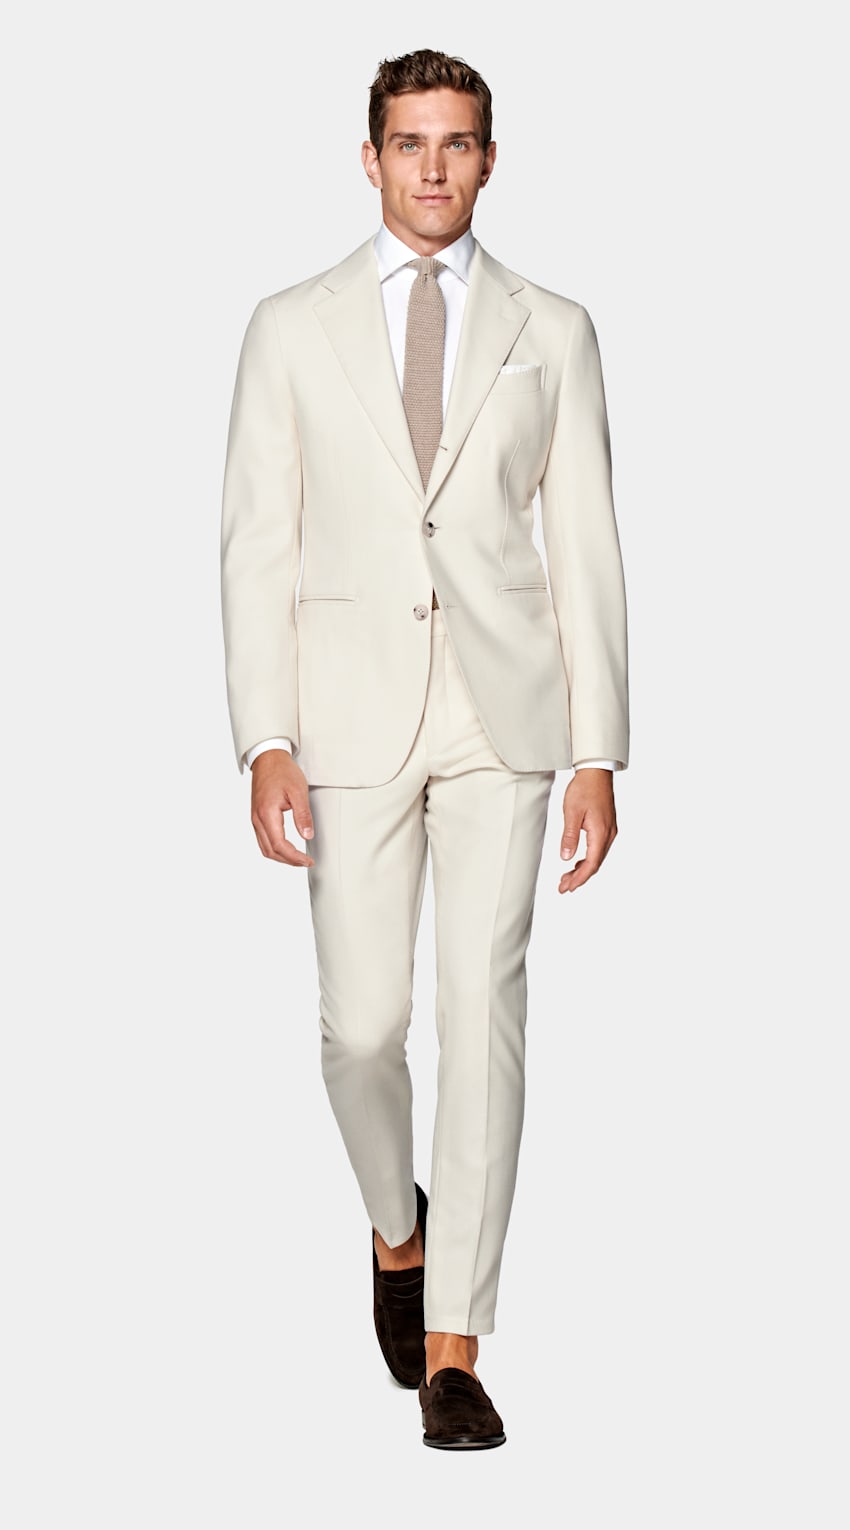 SUITSUPPLY Circular Wool Flannel by Vitale Barberis Canonico, Italy Off-White Havana Suit